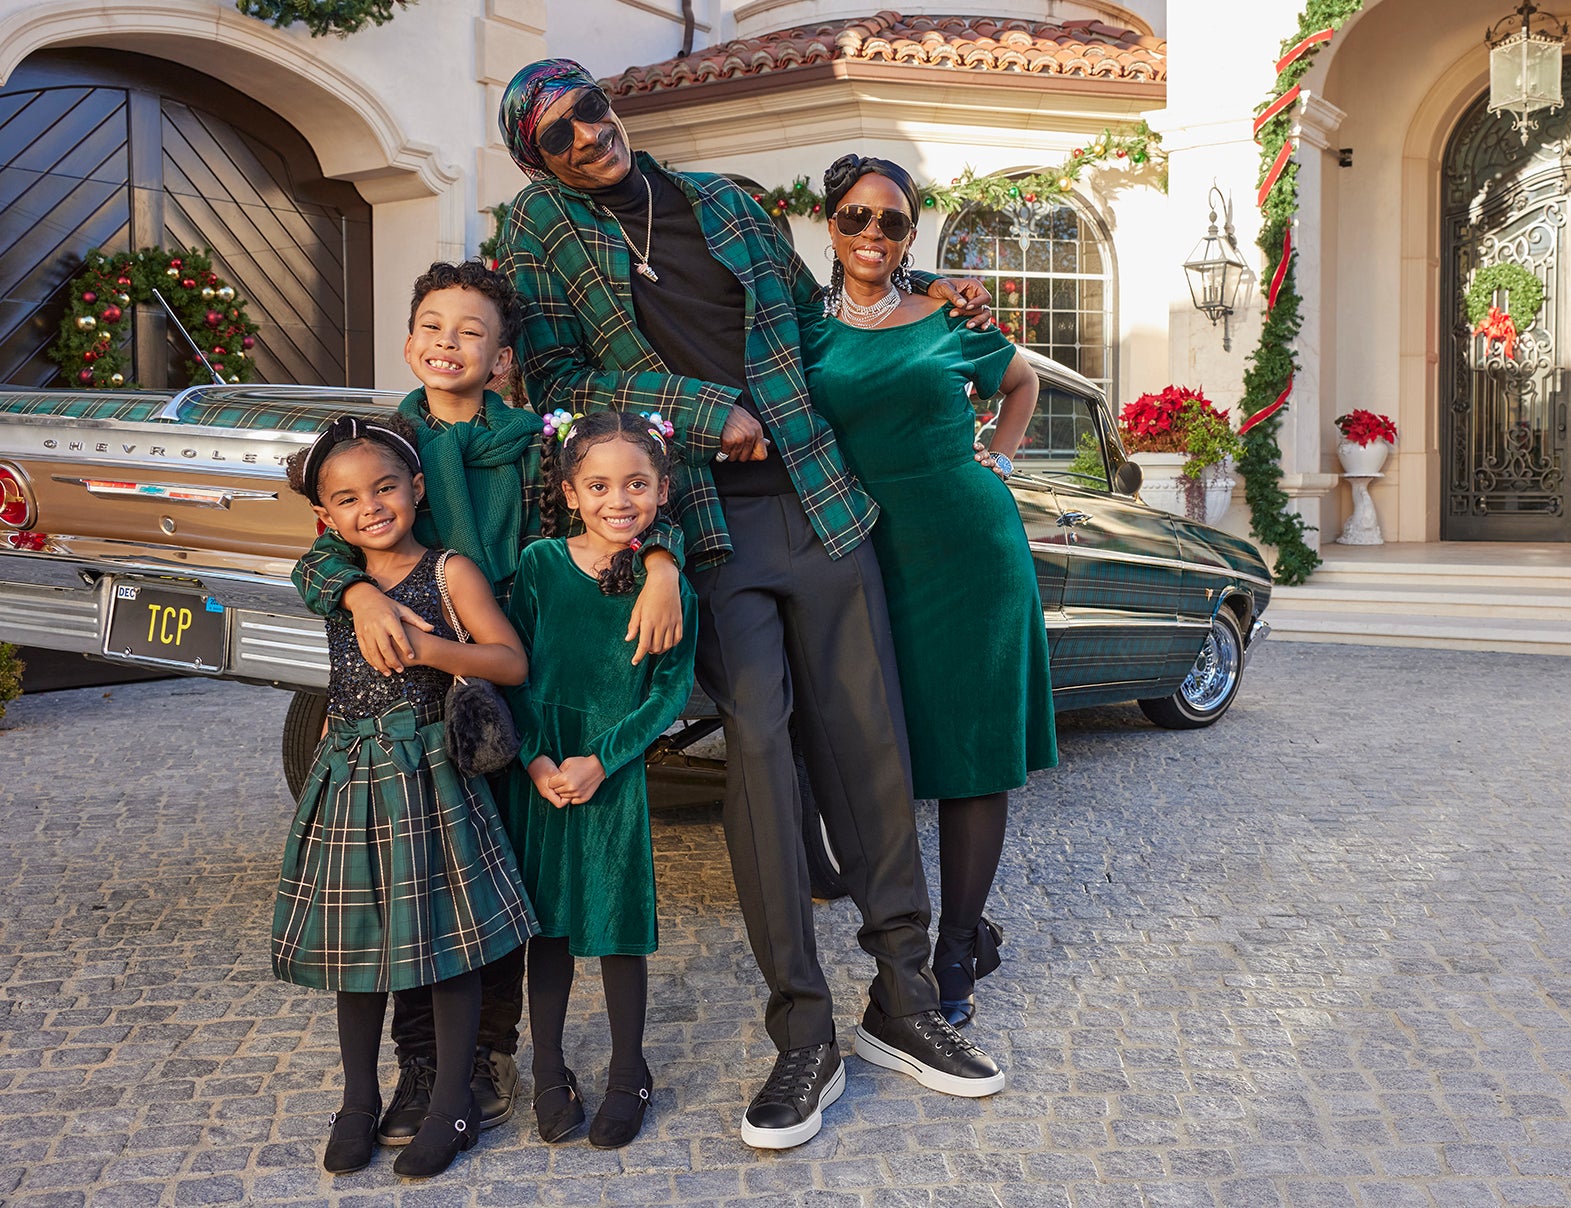 Snoop Dogg, Shante And Three Generations Of The Broadus Family Star In The Children’s Place Holiday Campaign